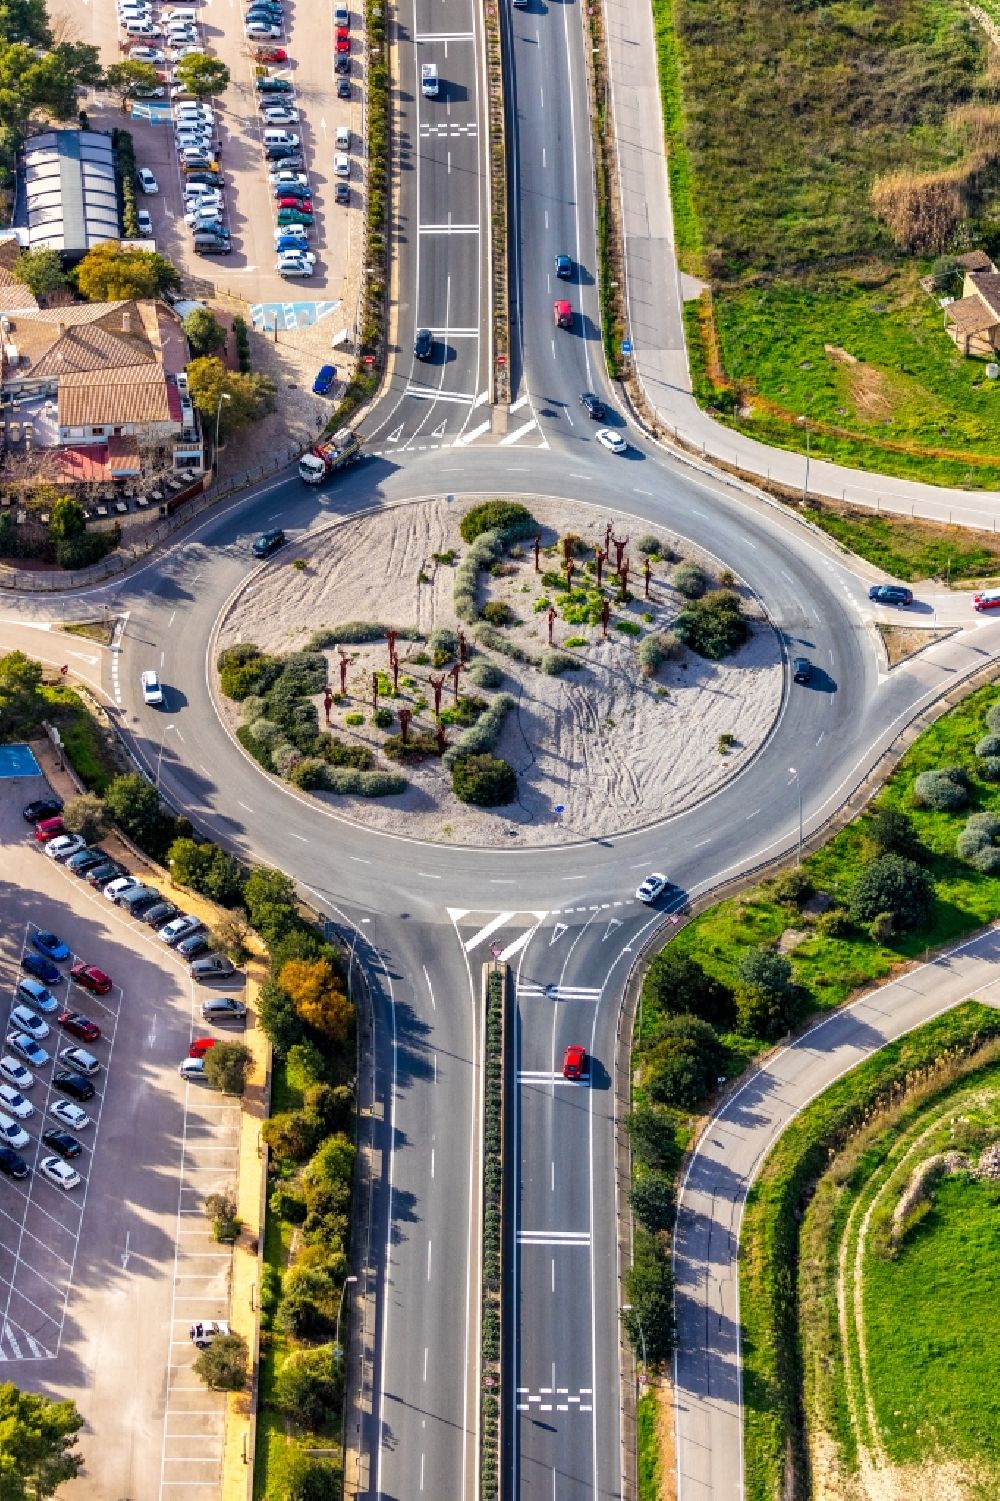 Vilafranca de Bonany from above - Traffic management of the roundabout road of the Ma-15 - Ma-3310 - Ma-5110 in Vilafranca de Bonany in Balearische Insel Mallorca, Spain